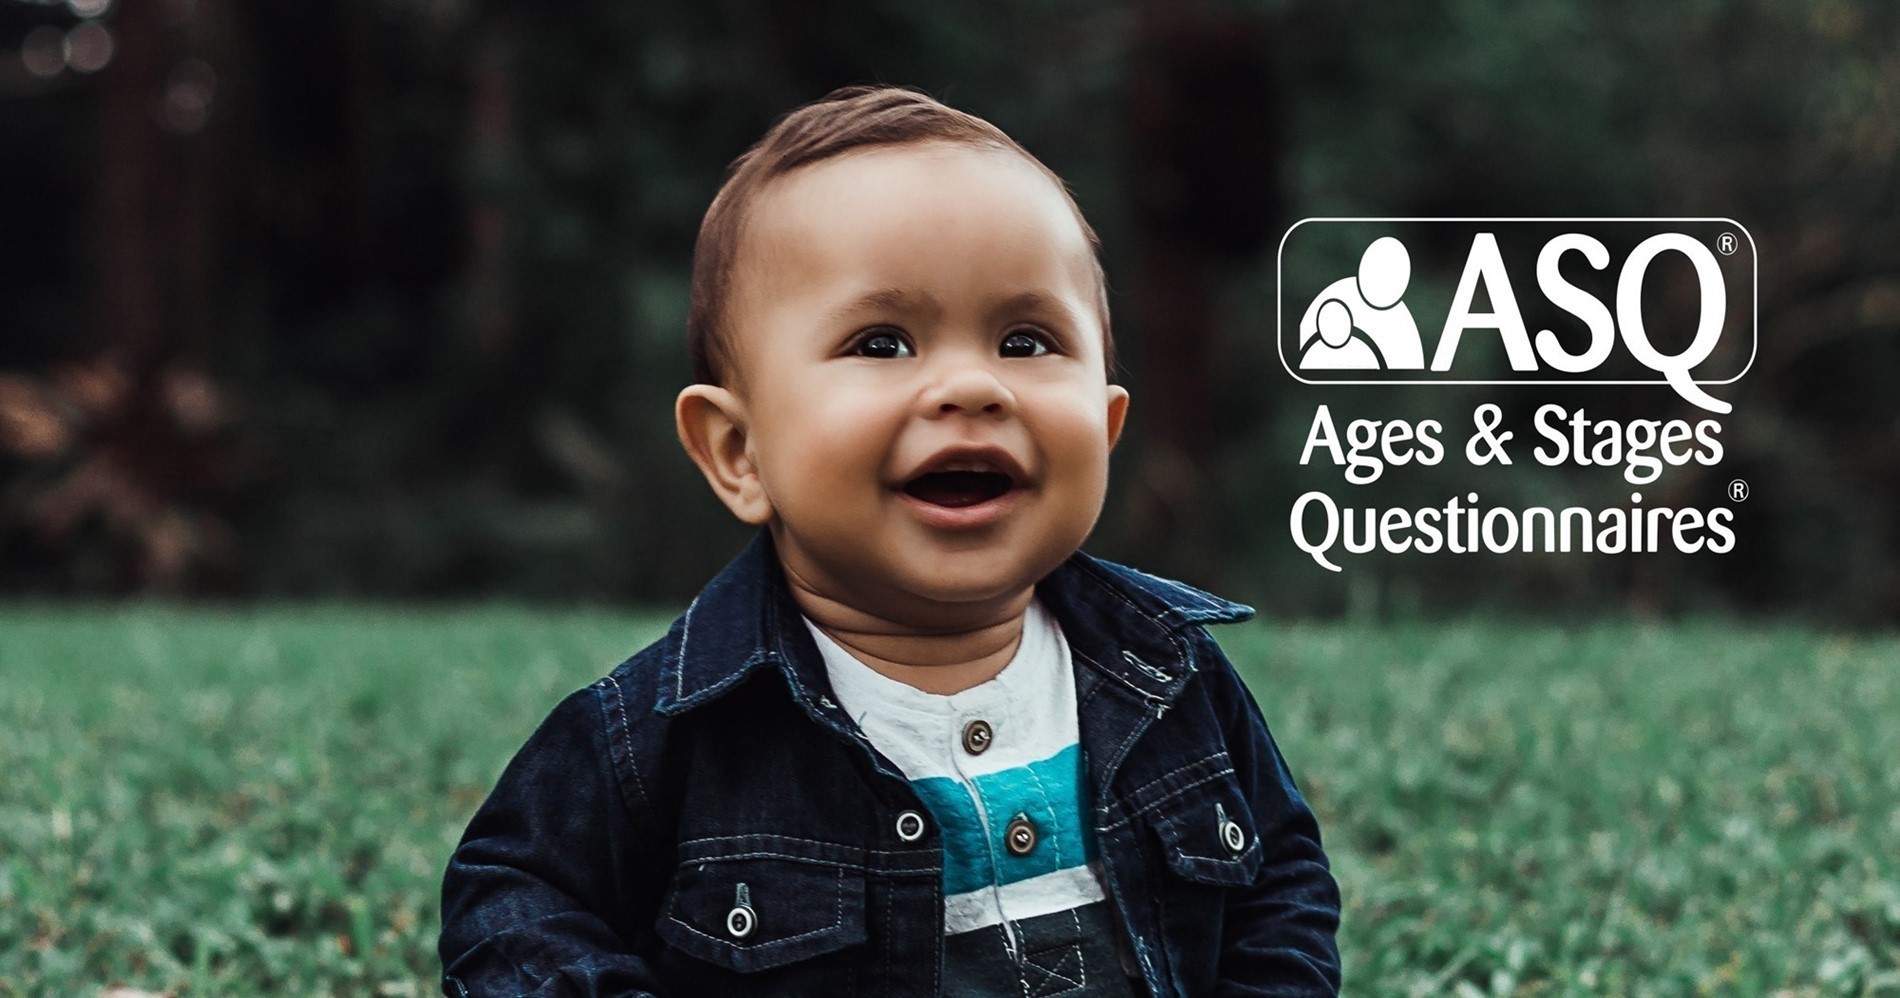 Learn more about the Ages & Stages Questionnaire (ASQ) Online